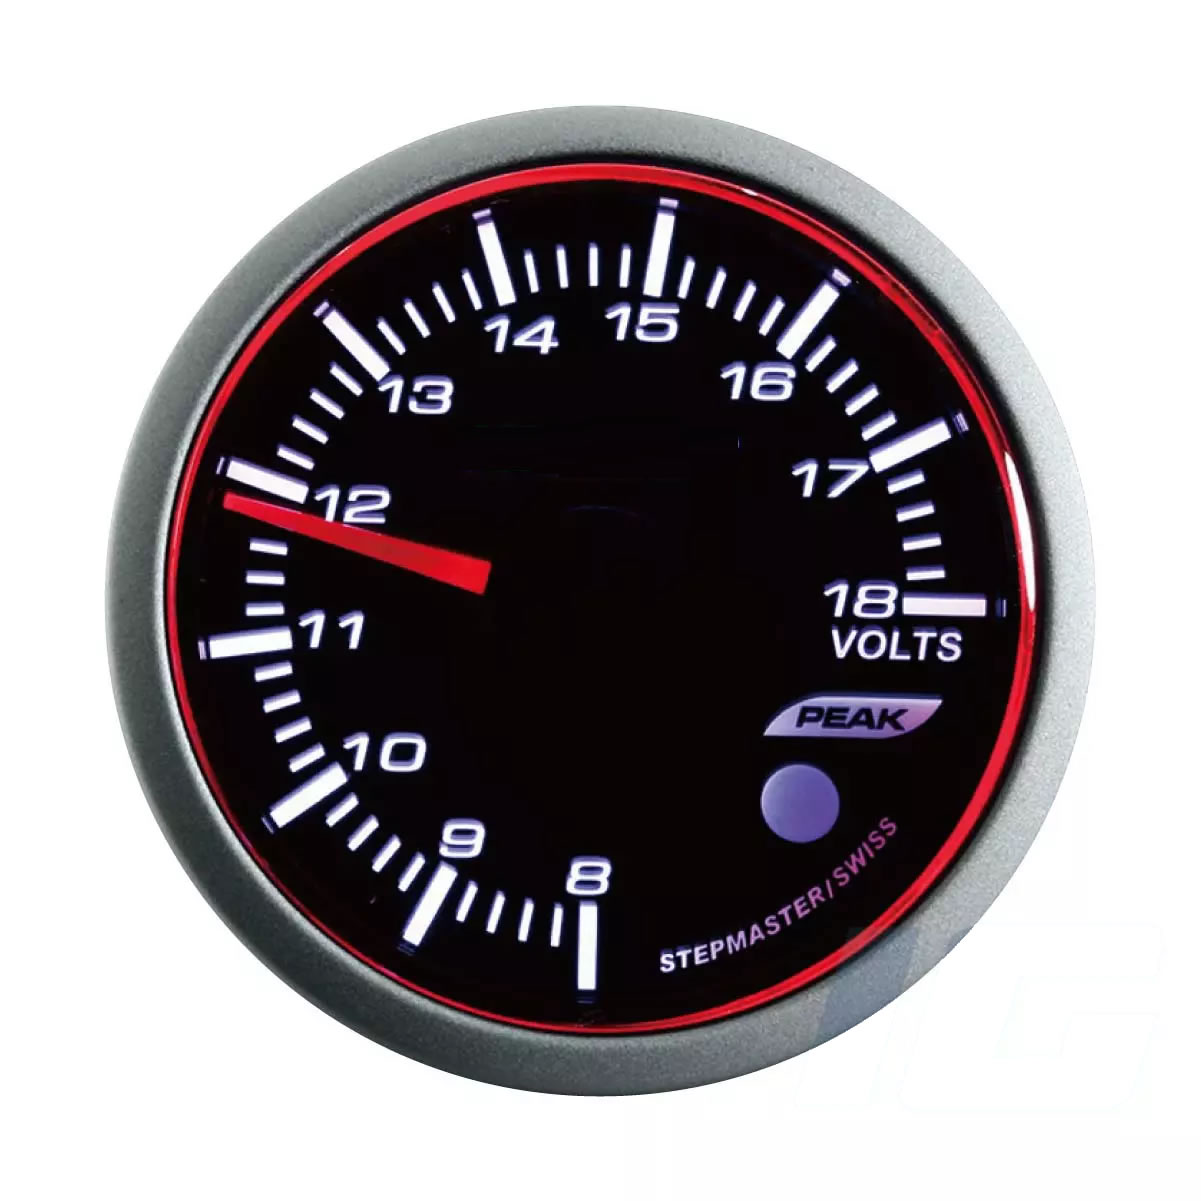 60mm White and Blue and Amber LED Performance Car Gauges - Volt Gauge With Warning and Peak For Your Sport Racing Car